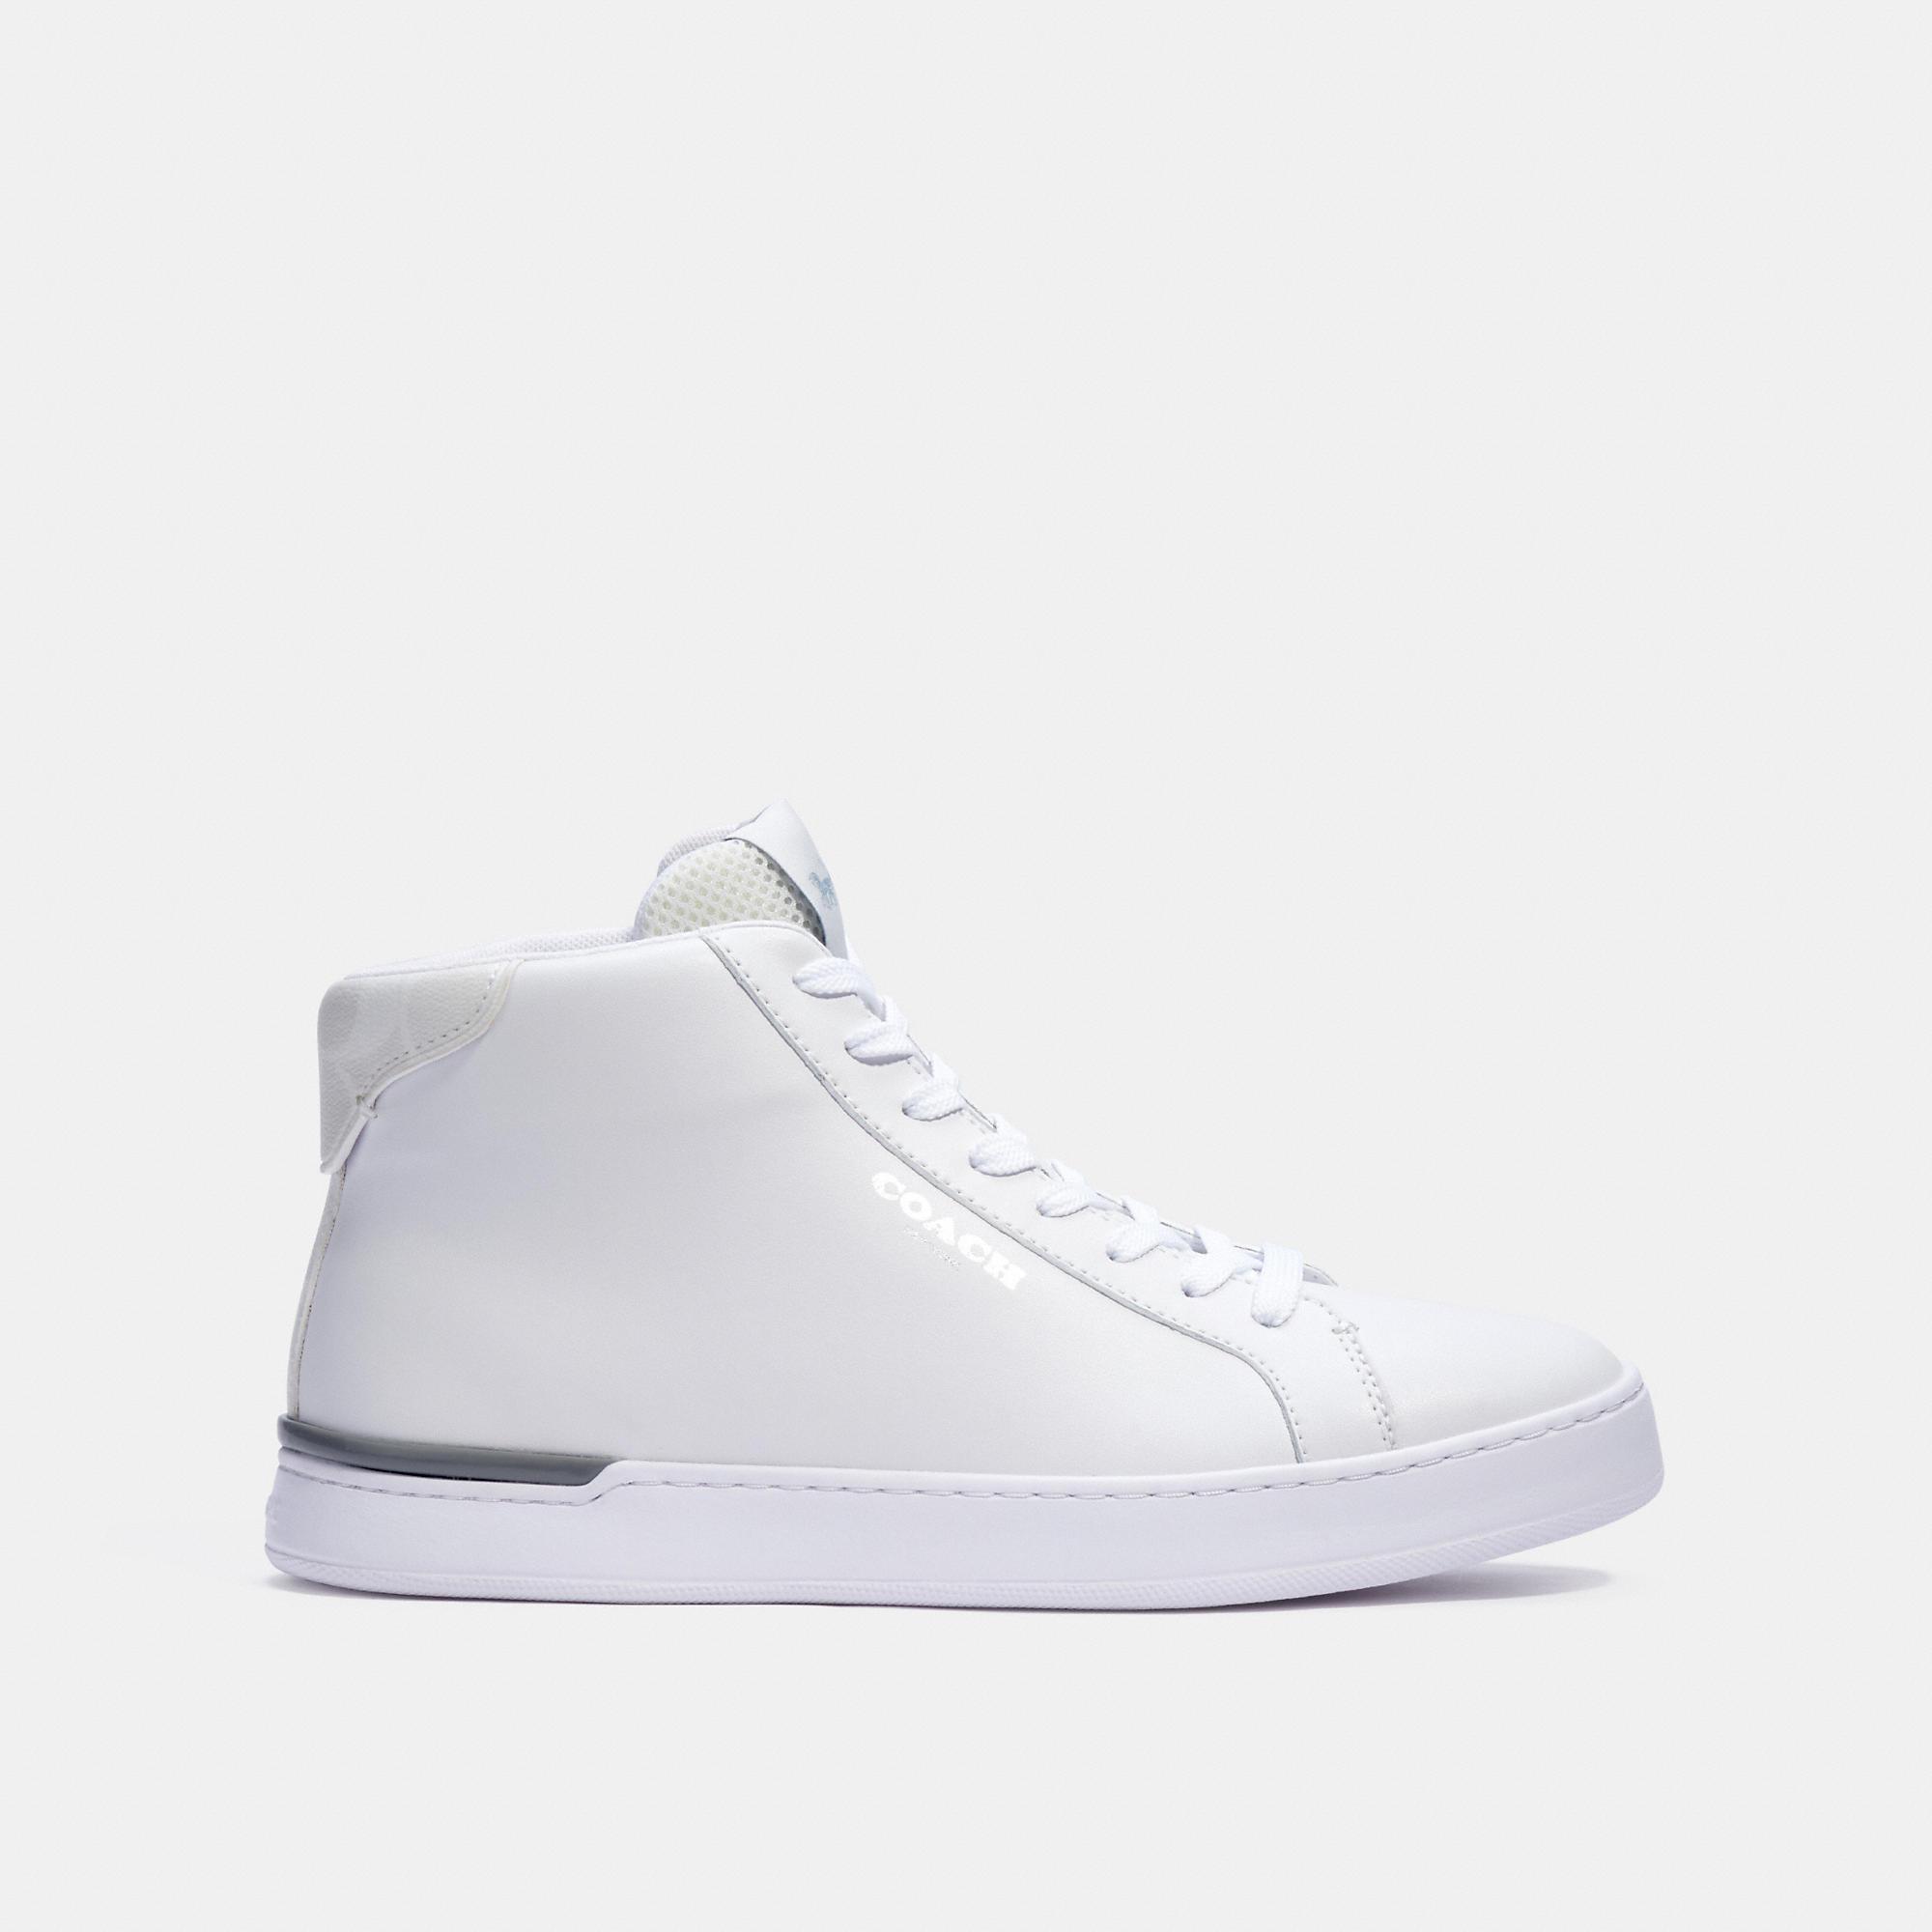 COACH Leather Clip High Top Sneaker in White for Men - Lyst